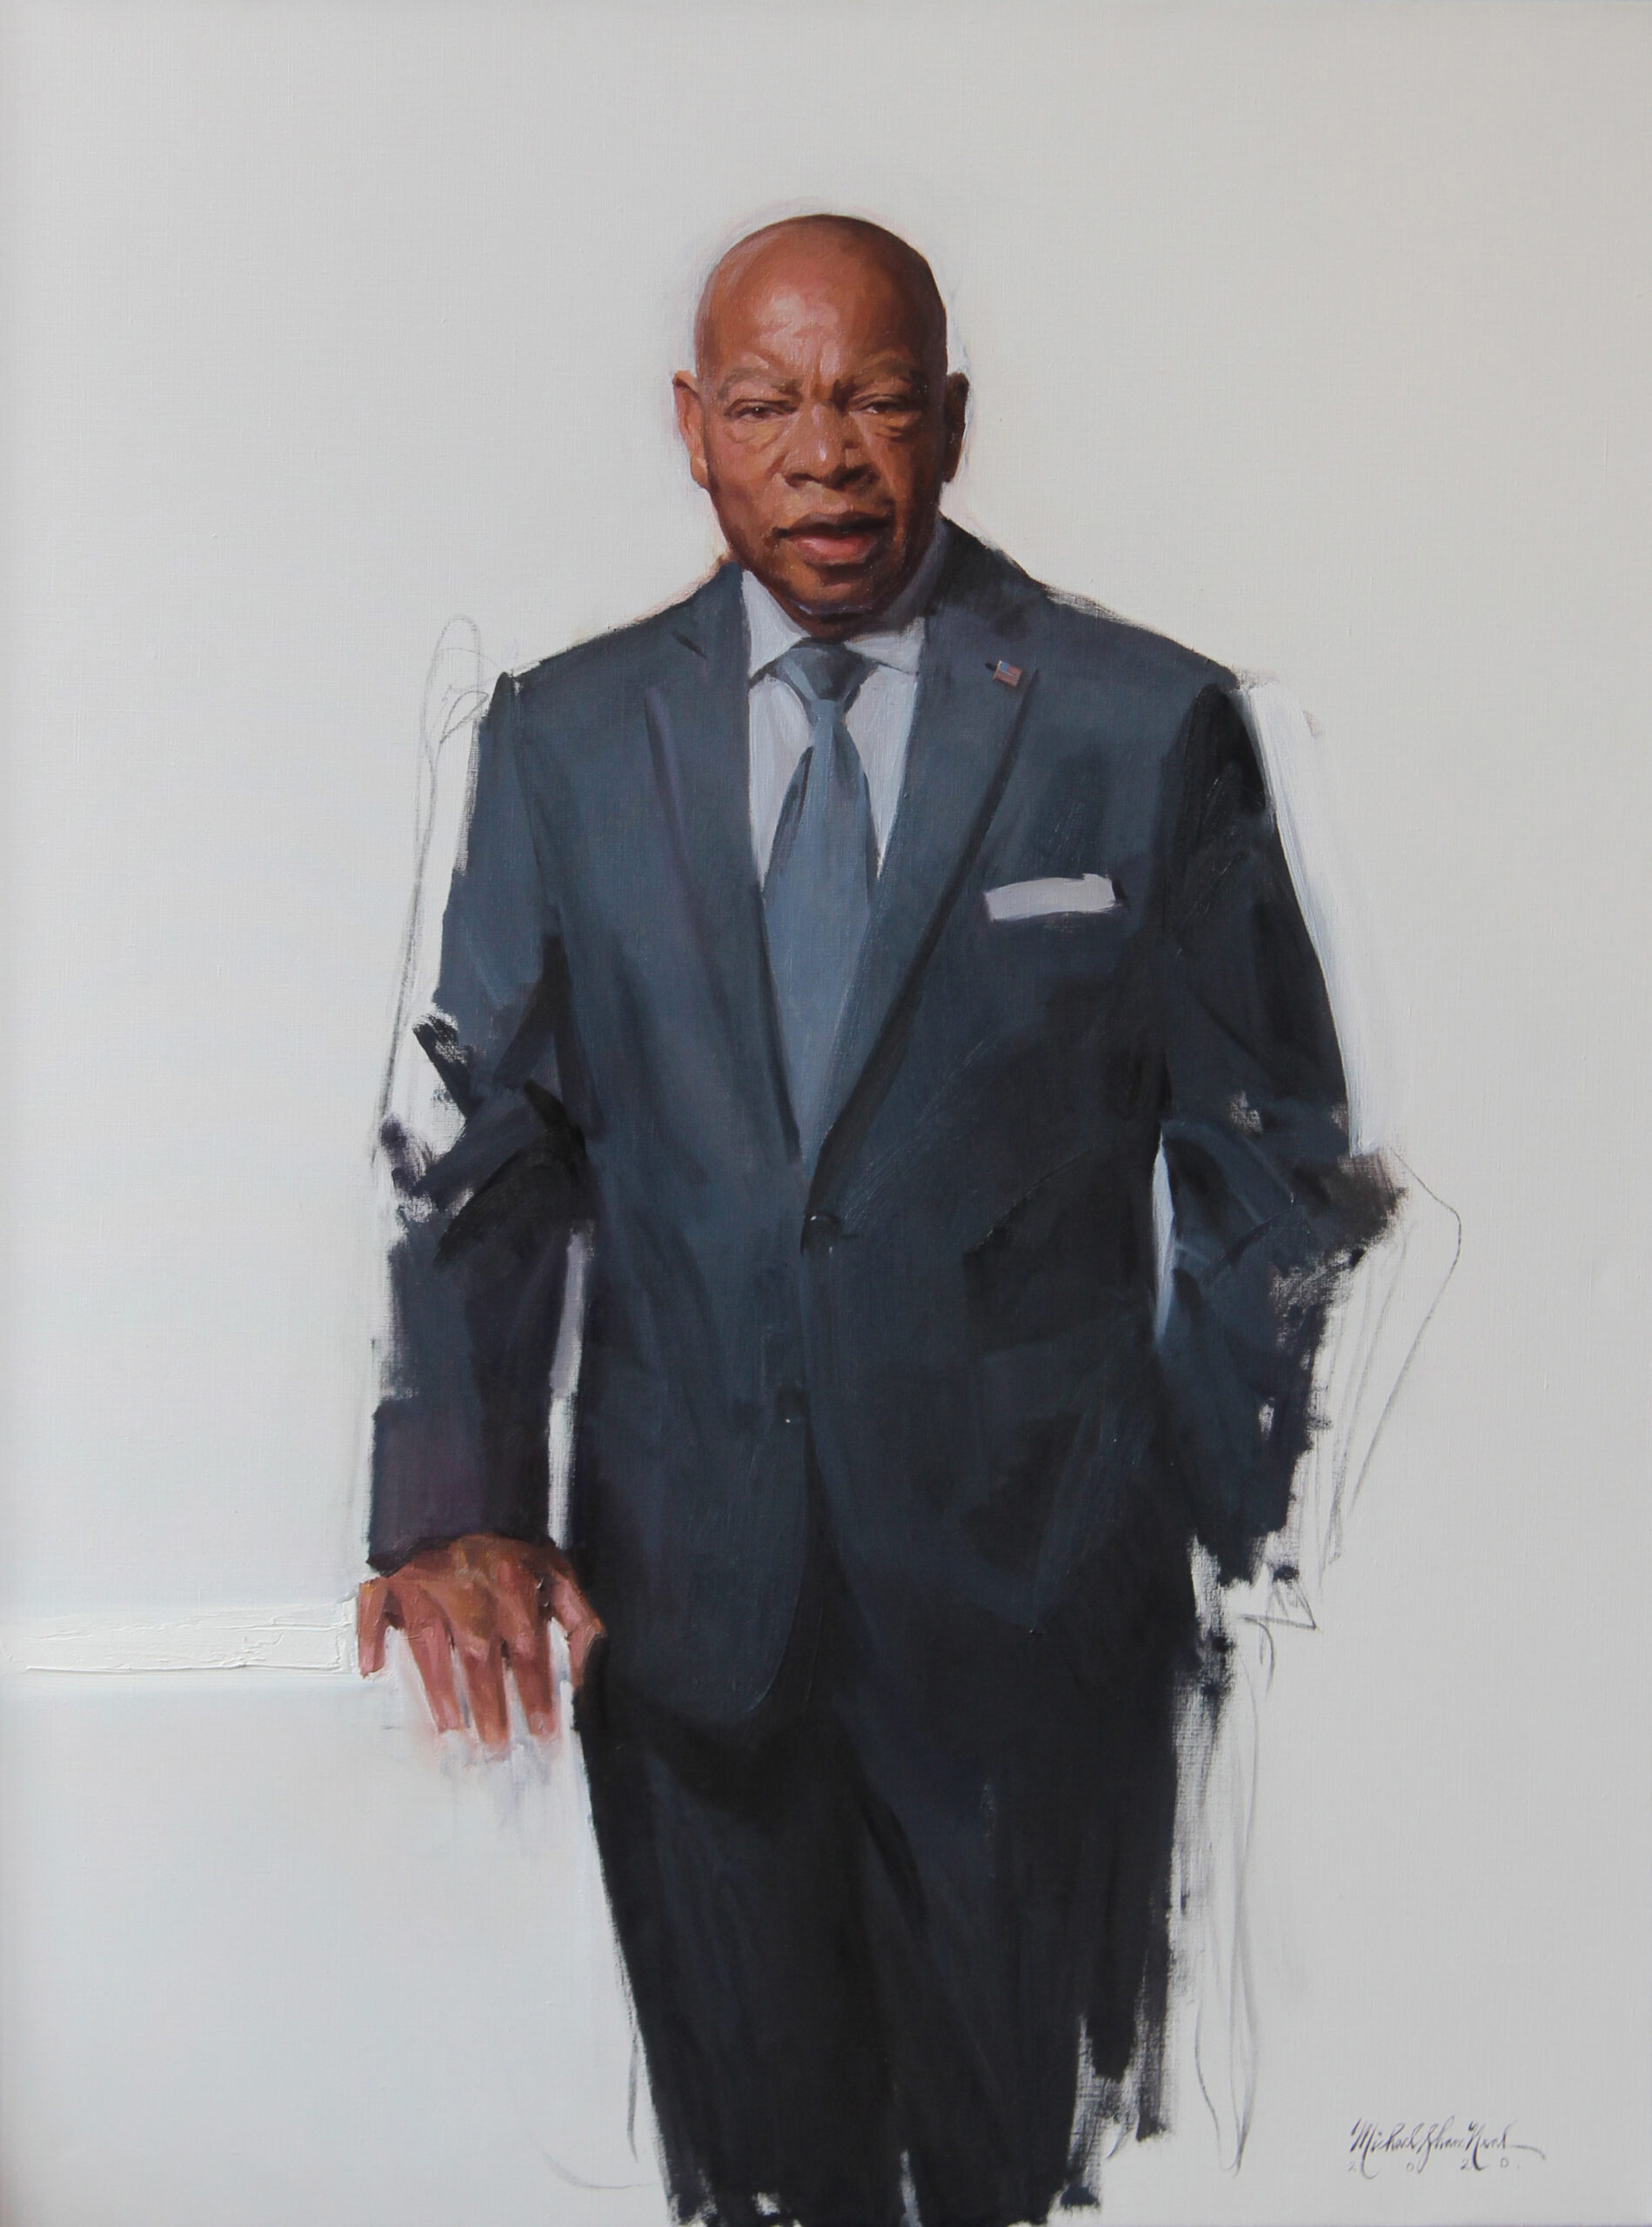 Congressman John Lewis, collection of the National Portrait Gallery, Smithsonian Institution, Washington, D.C., 36" x 48", oil on canvas, by Michael Shane Neal